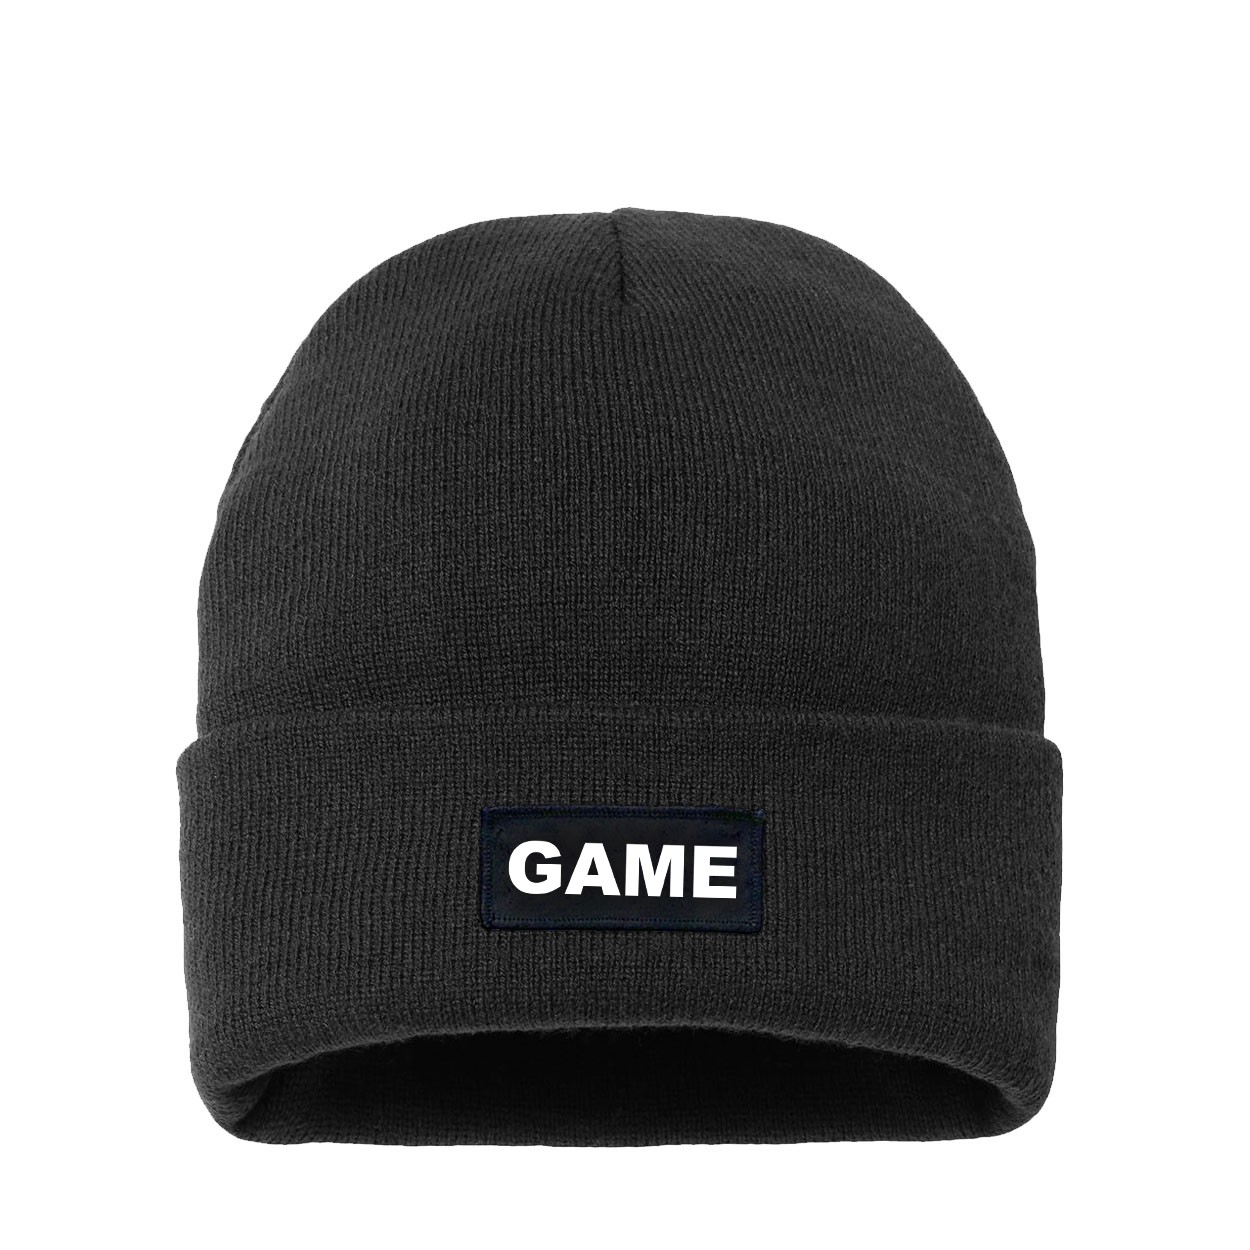 Game Brand Logo Night Out Woven Patch Night Out Sherpa Lined Cuffed Beanie Black (White Logo)